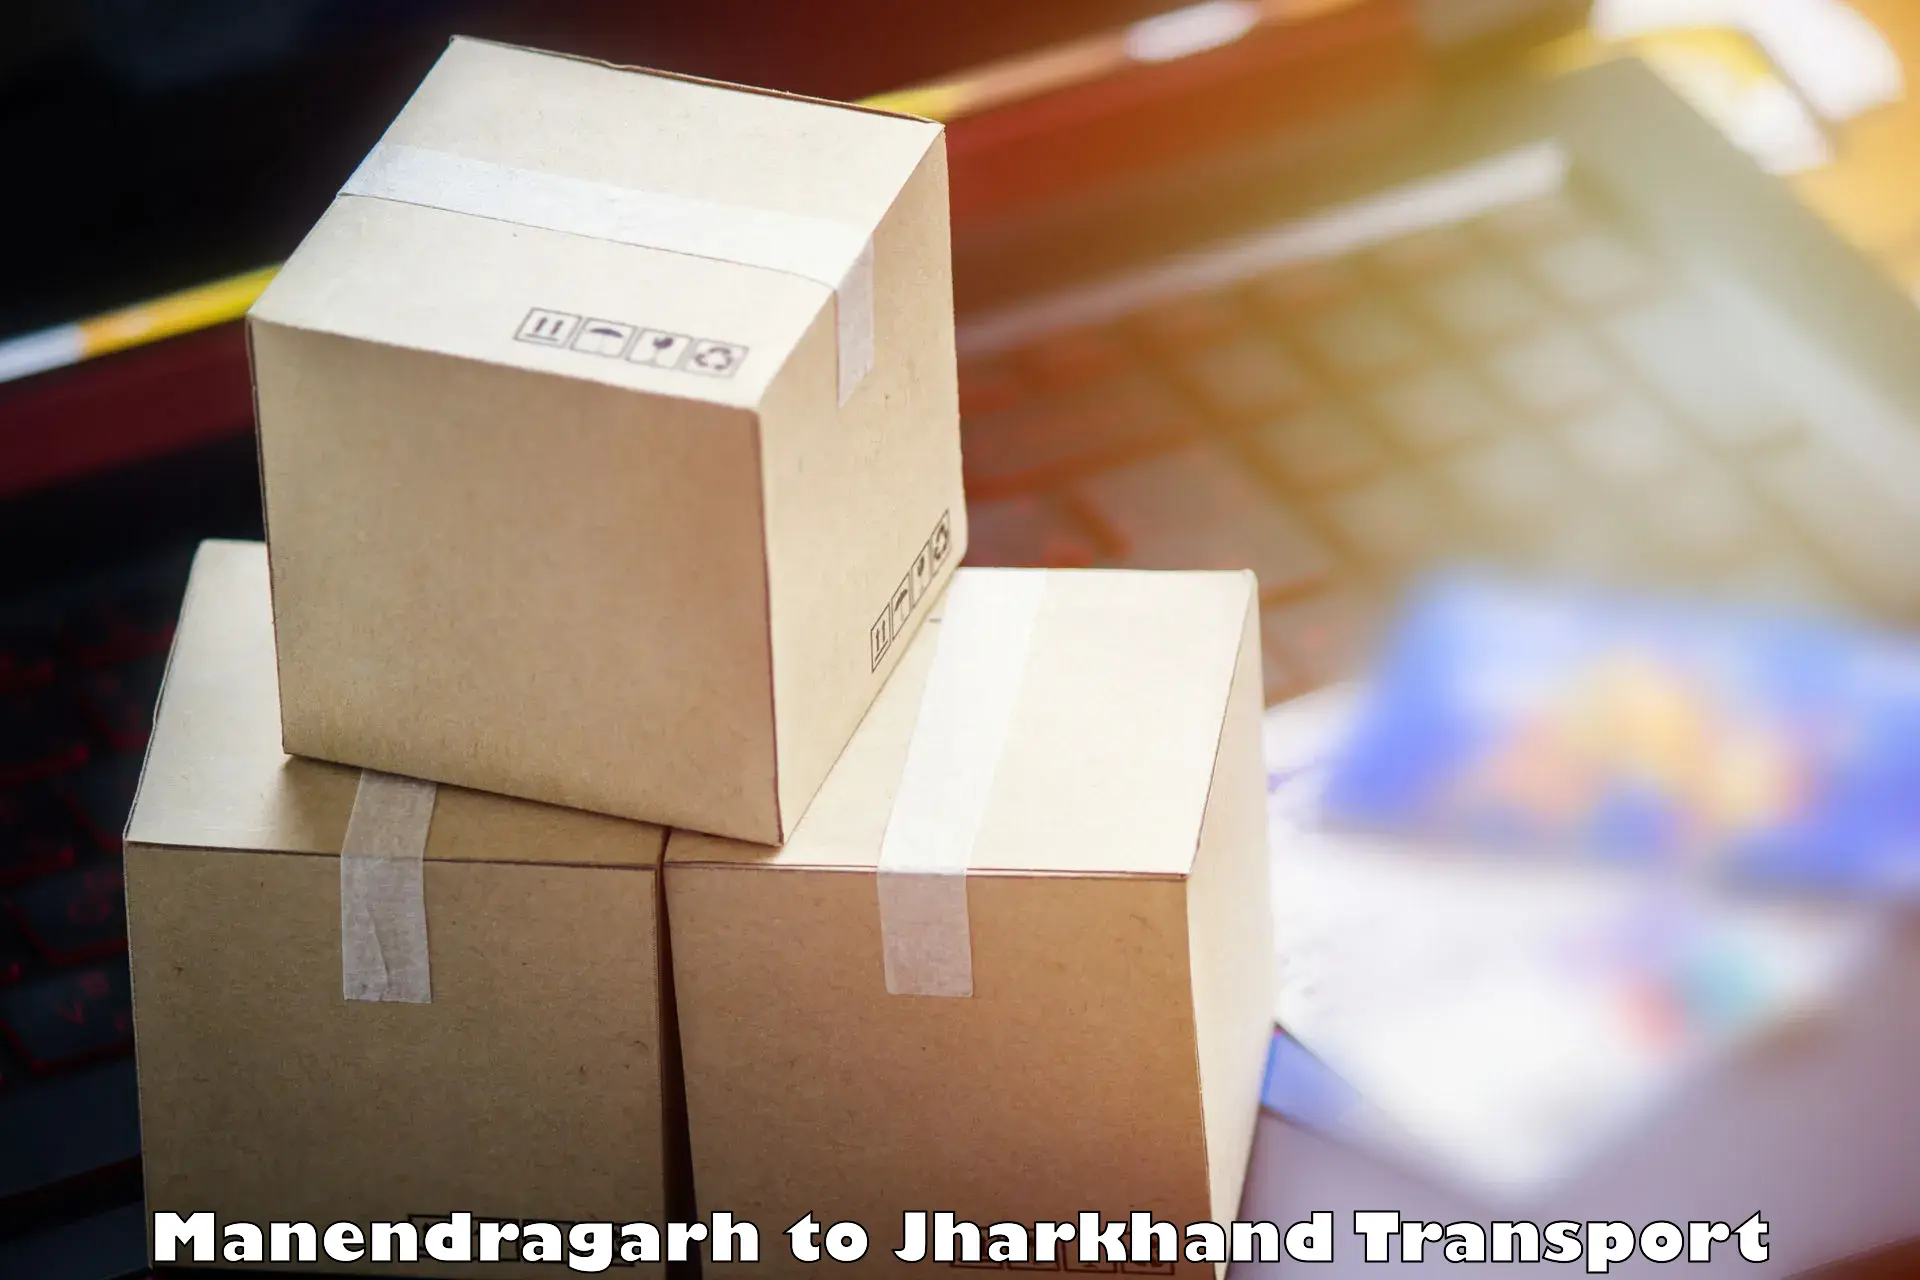 Delivery service Manendragarh to Jharkhand